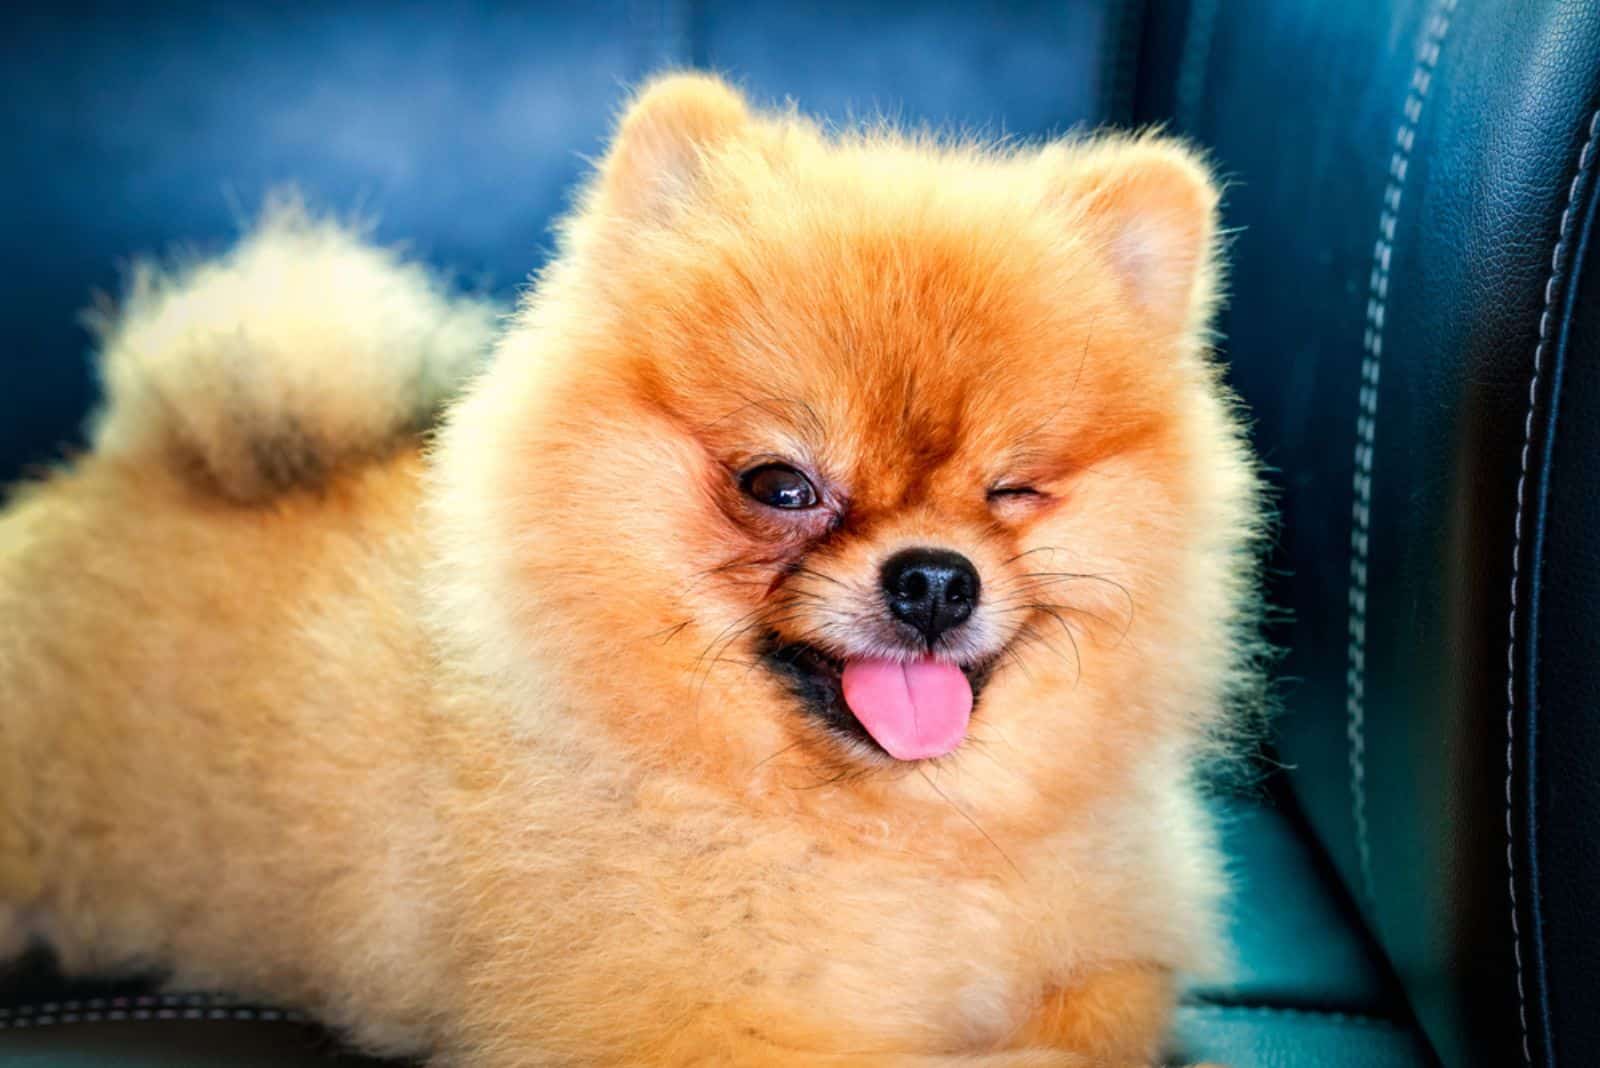 pomeranian dog laying down on leather sofa with one eye winking